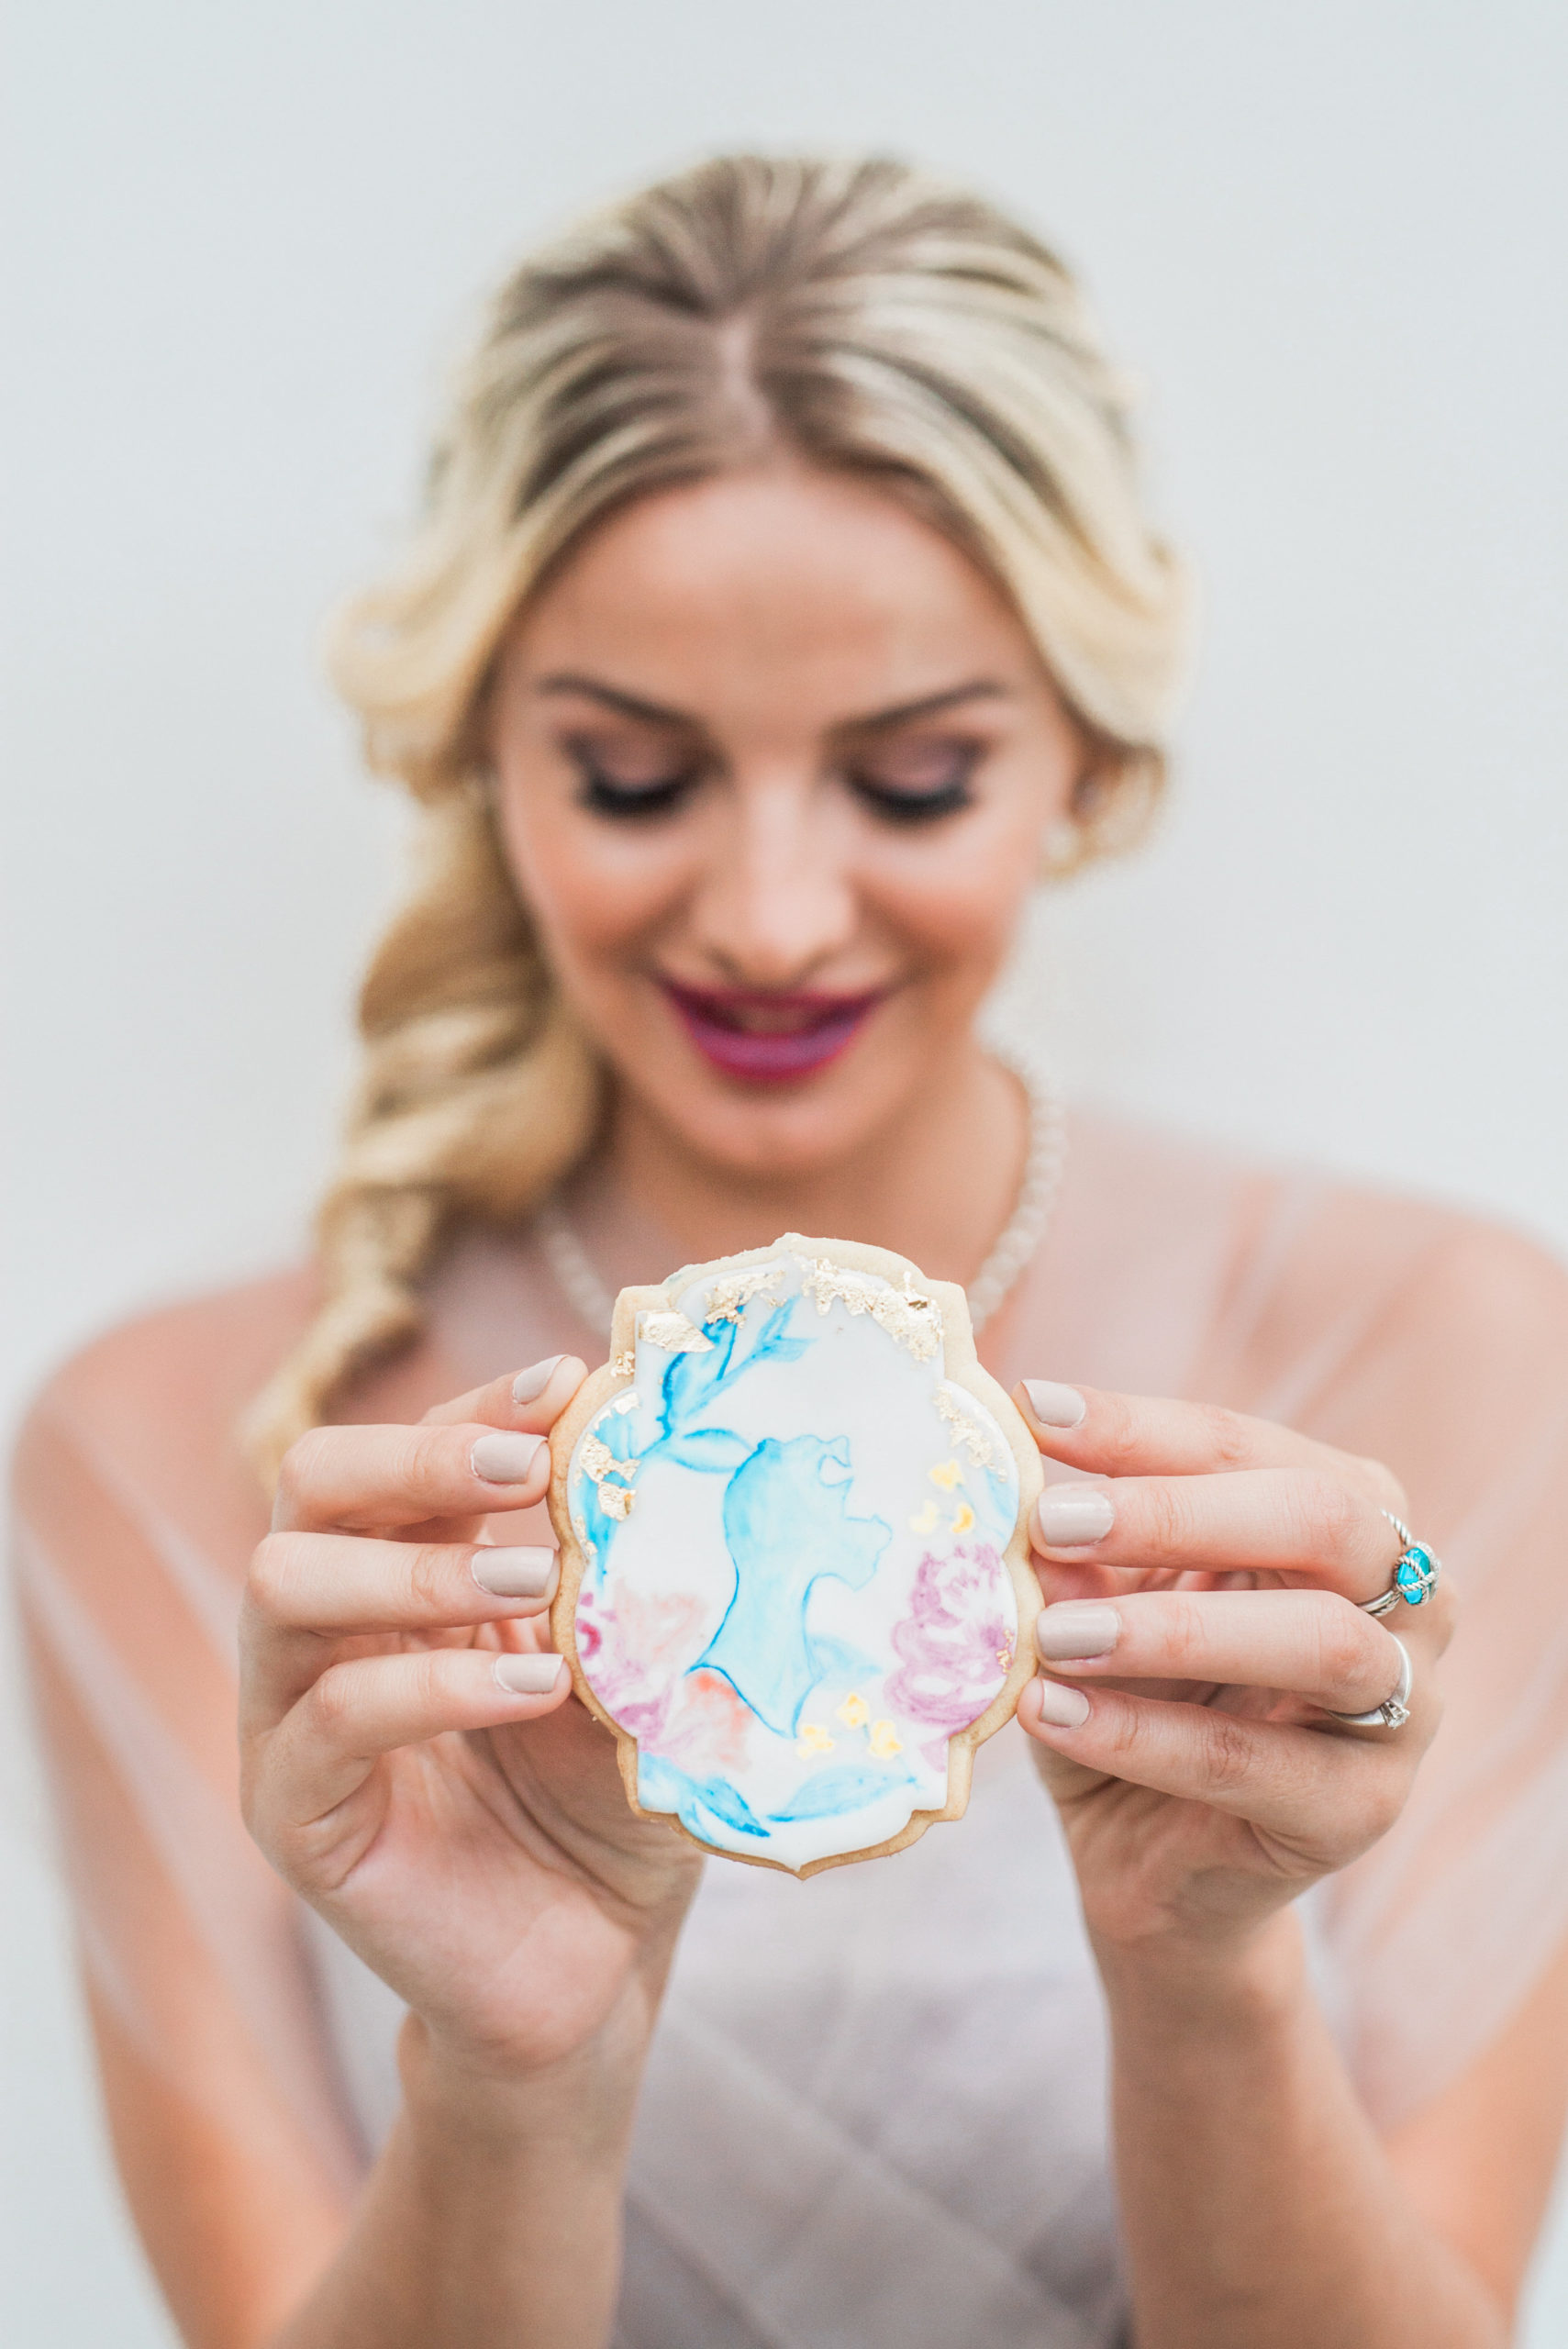 The Lady and the Tramp wedding included watercolor hand painted cookies that mirrored the watercolor invitations and colors as well